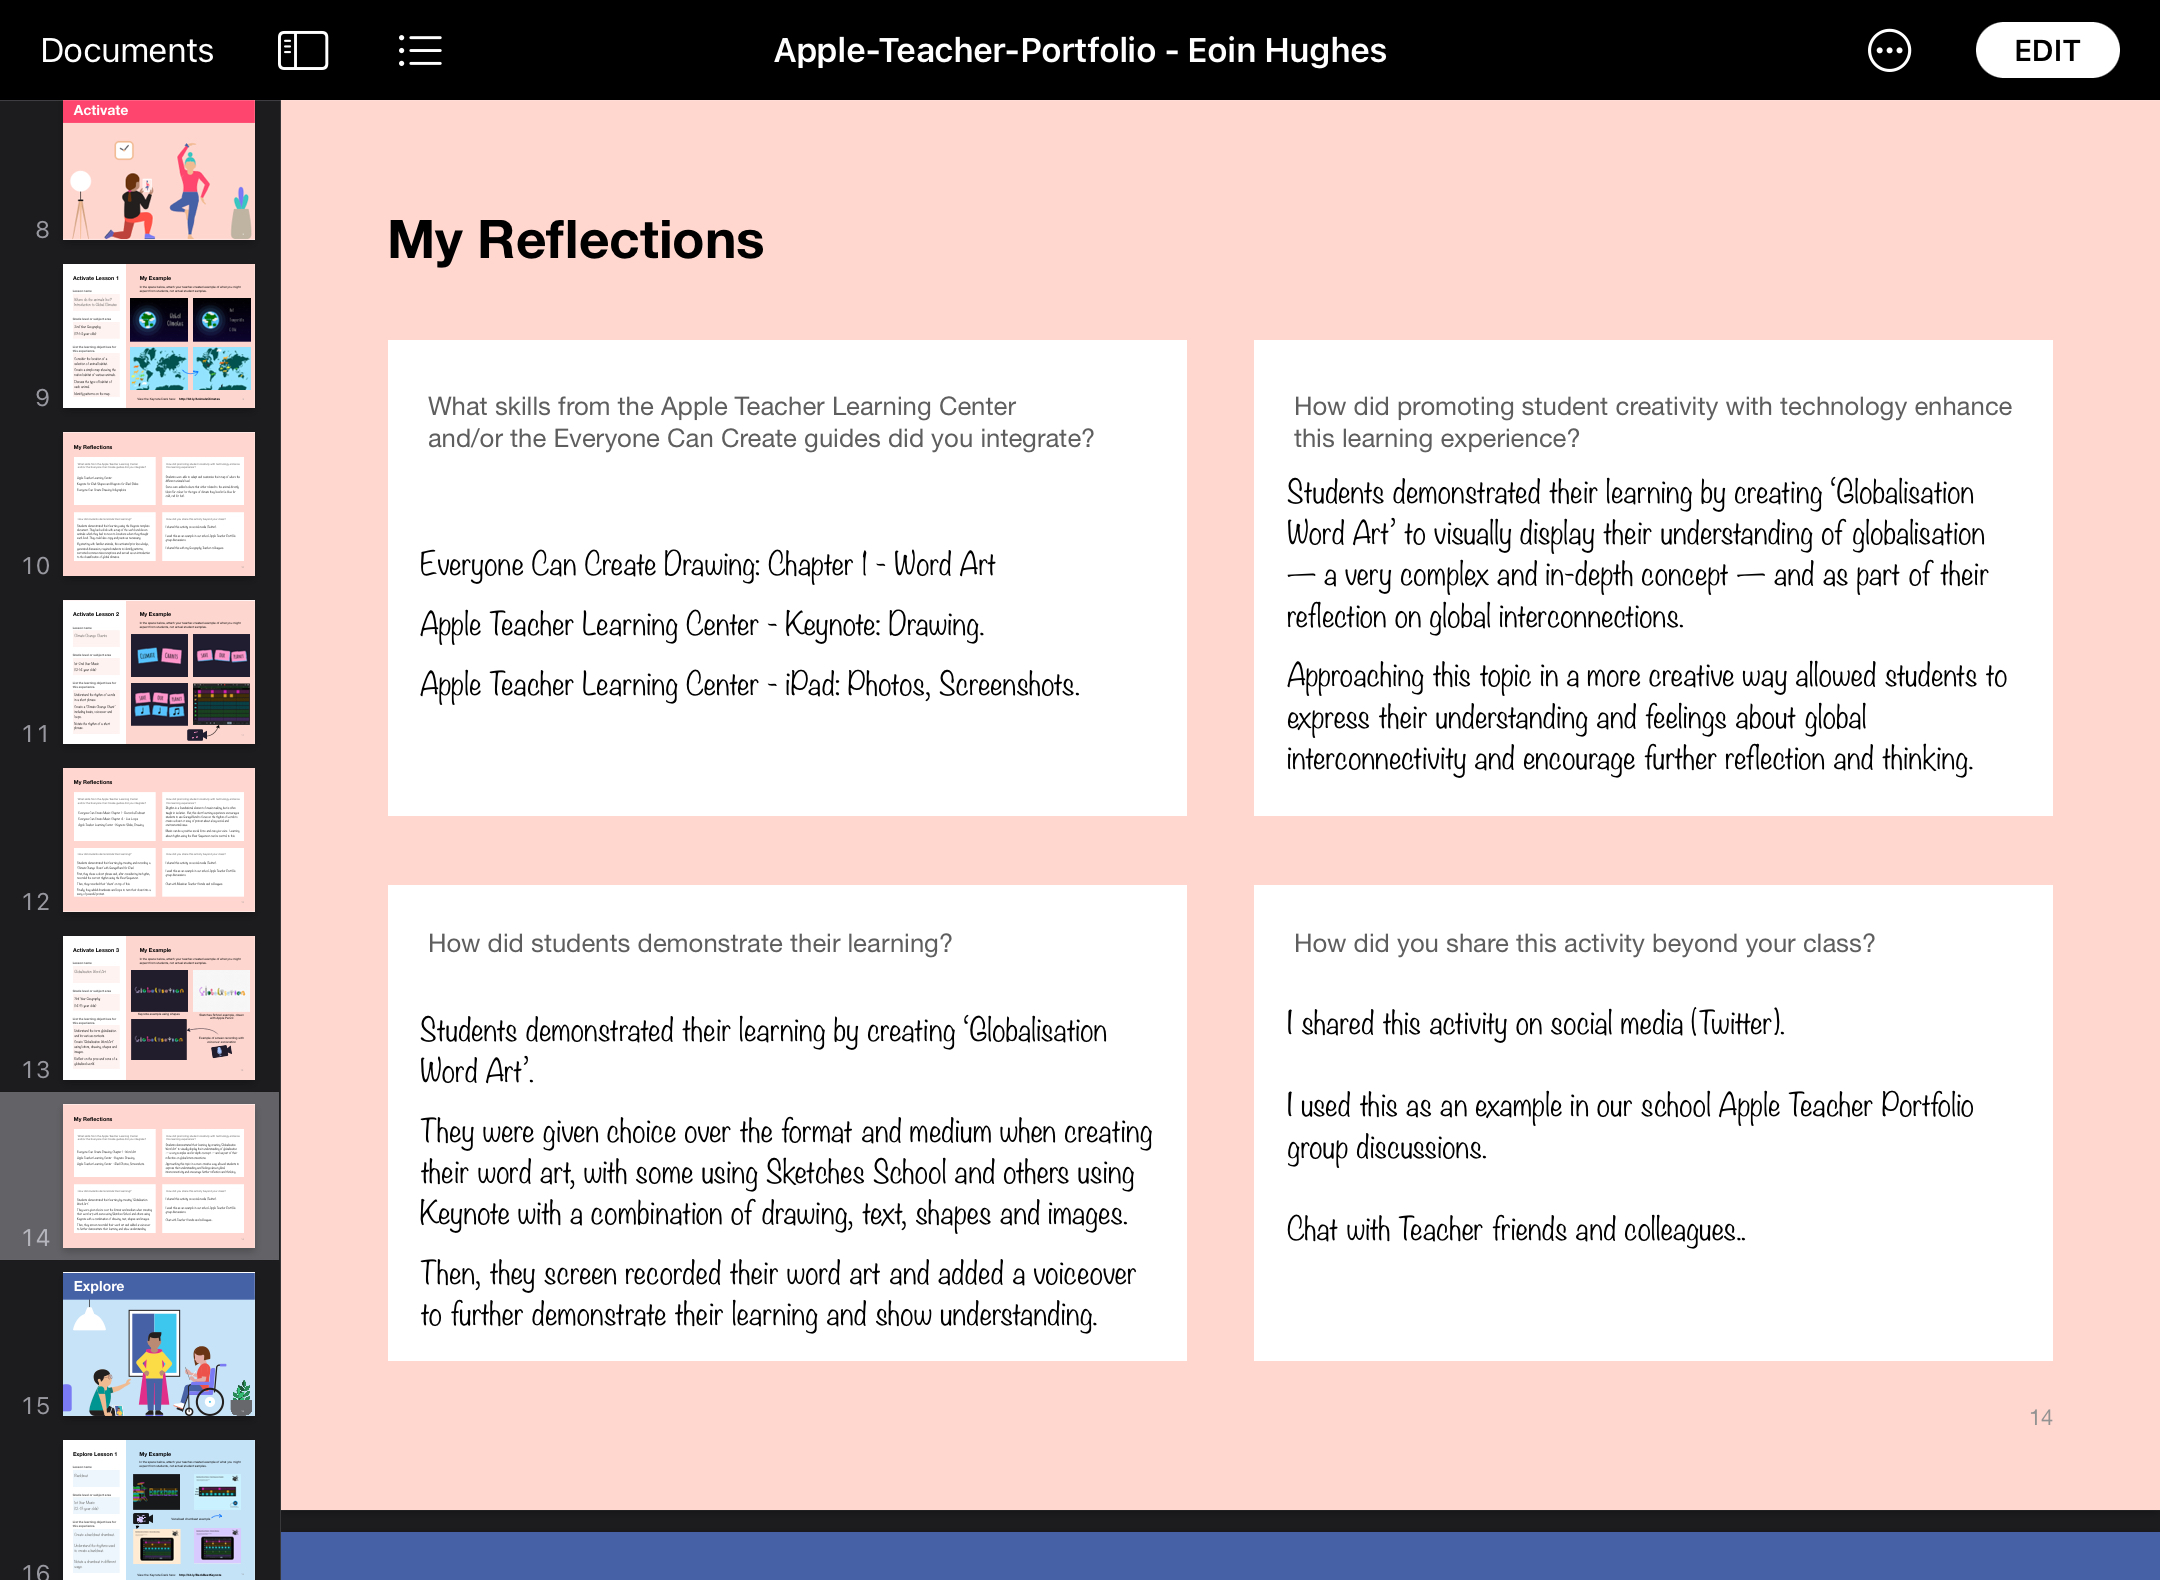 Apple Teacher Portfolio Activate lesson 3 screenshot. Includes reflections on skills, and how it promoted student creativity.